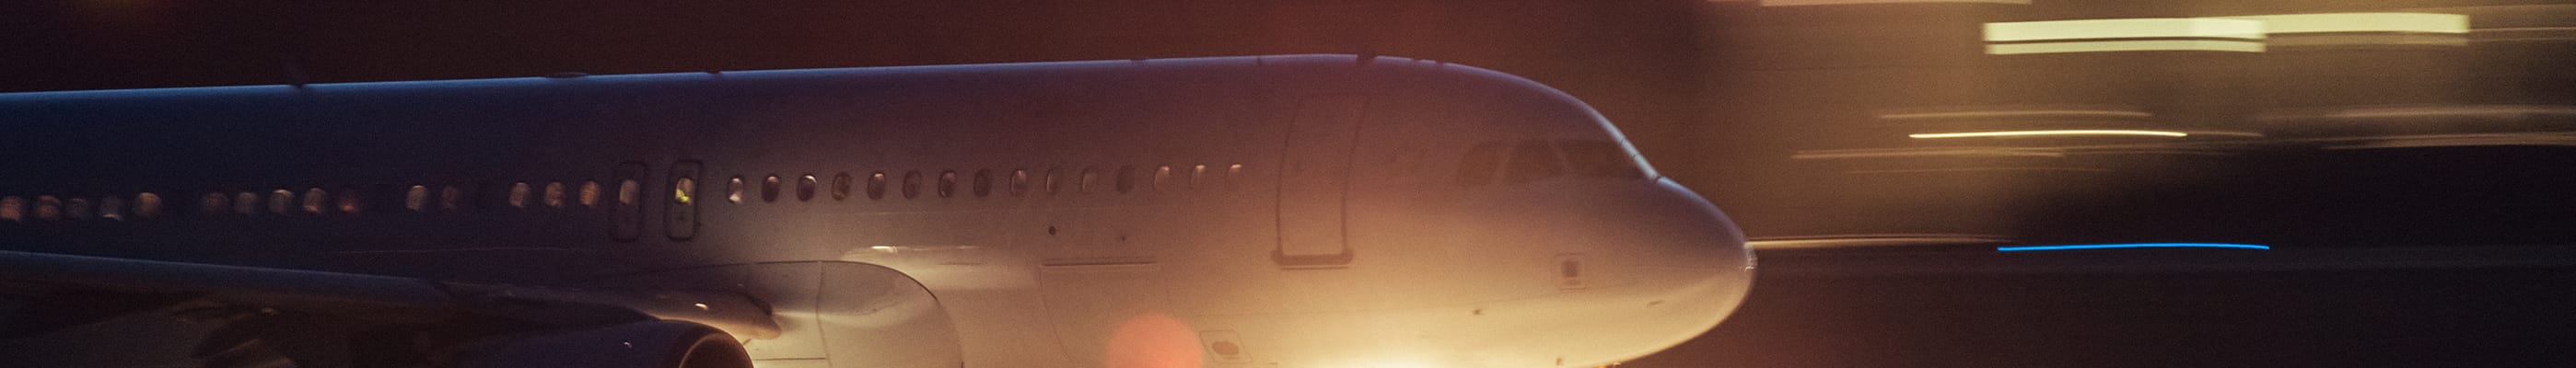 Image of passenger jet moving from left to right, with lights zooming past.